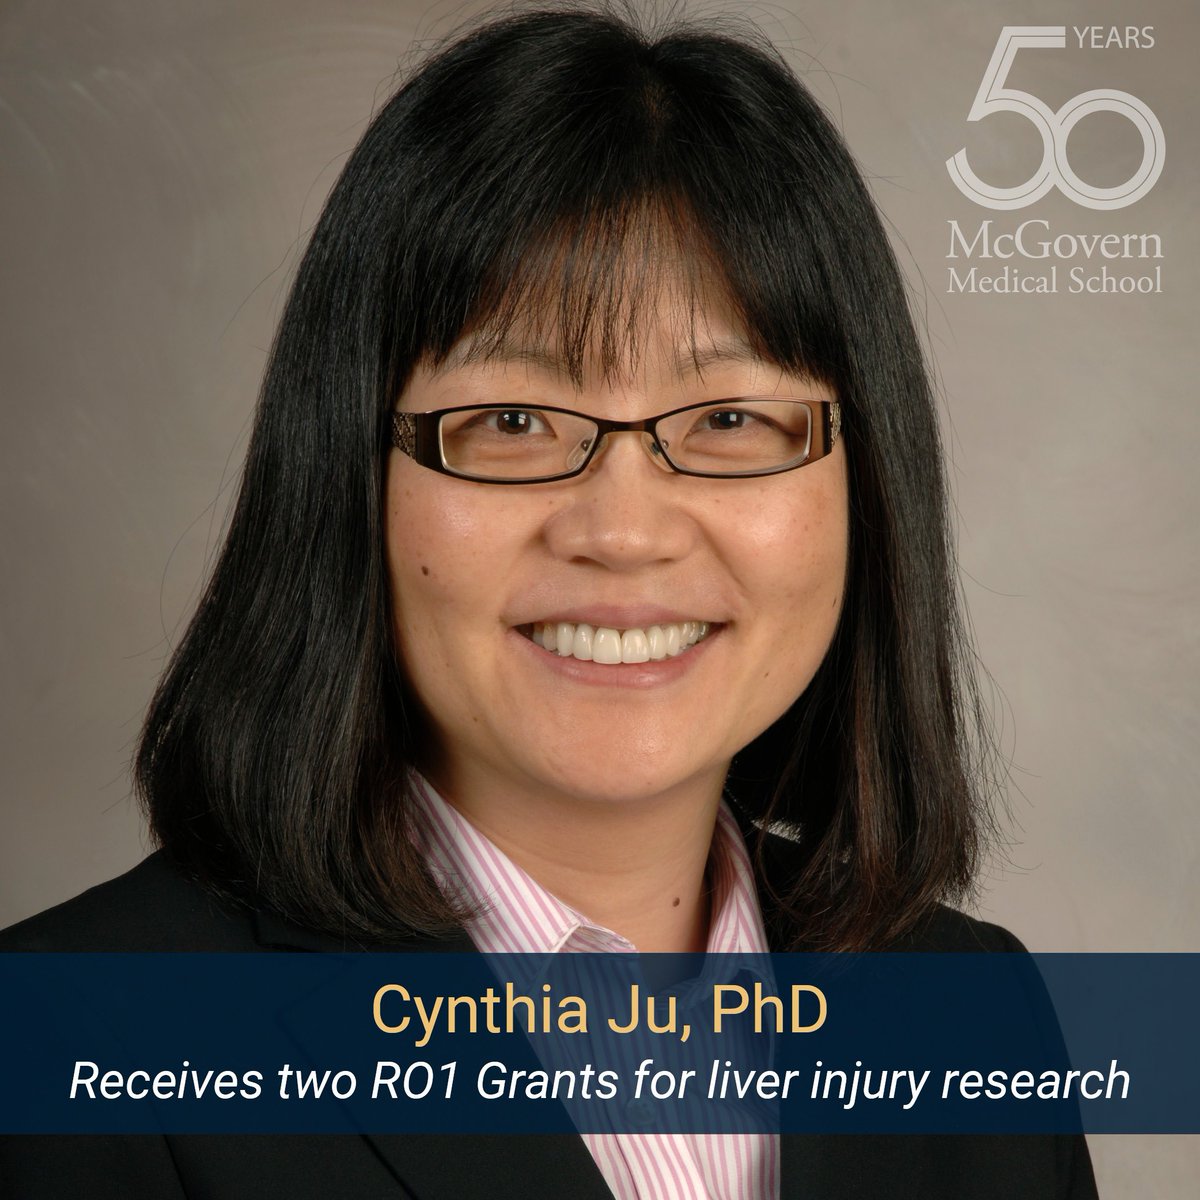 Newly funded research will focus on liver injury: go.uth.edu/nih